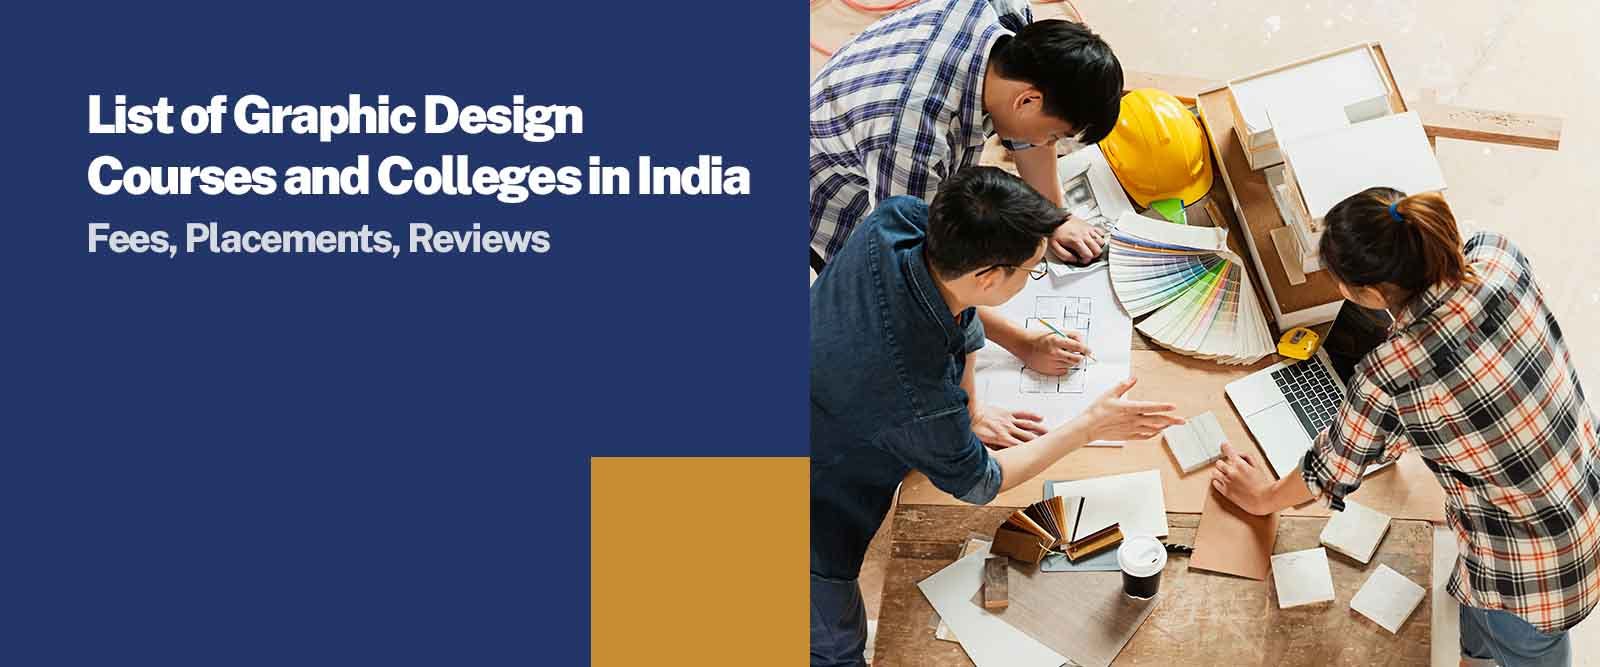 Graphic Design Courses and Colleges in India Placements